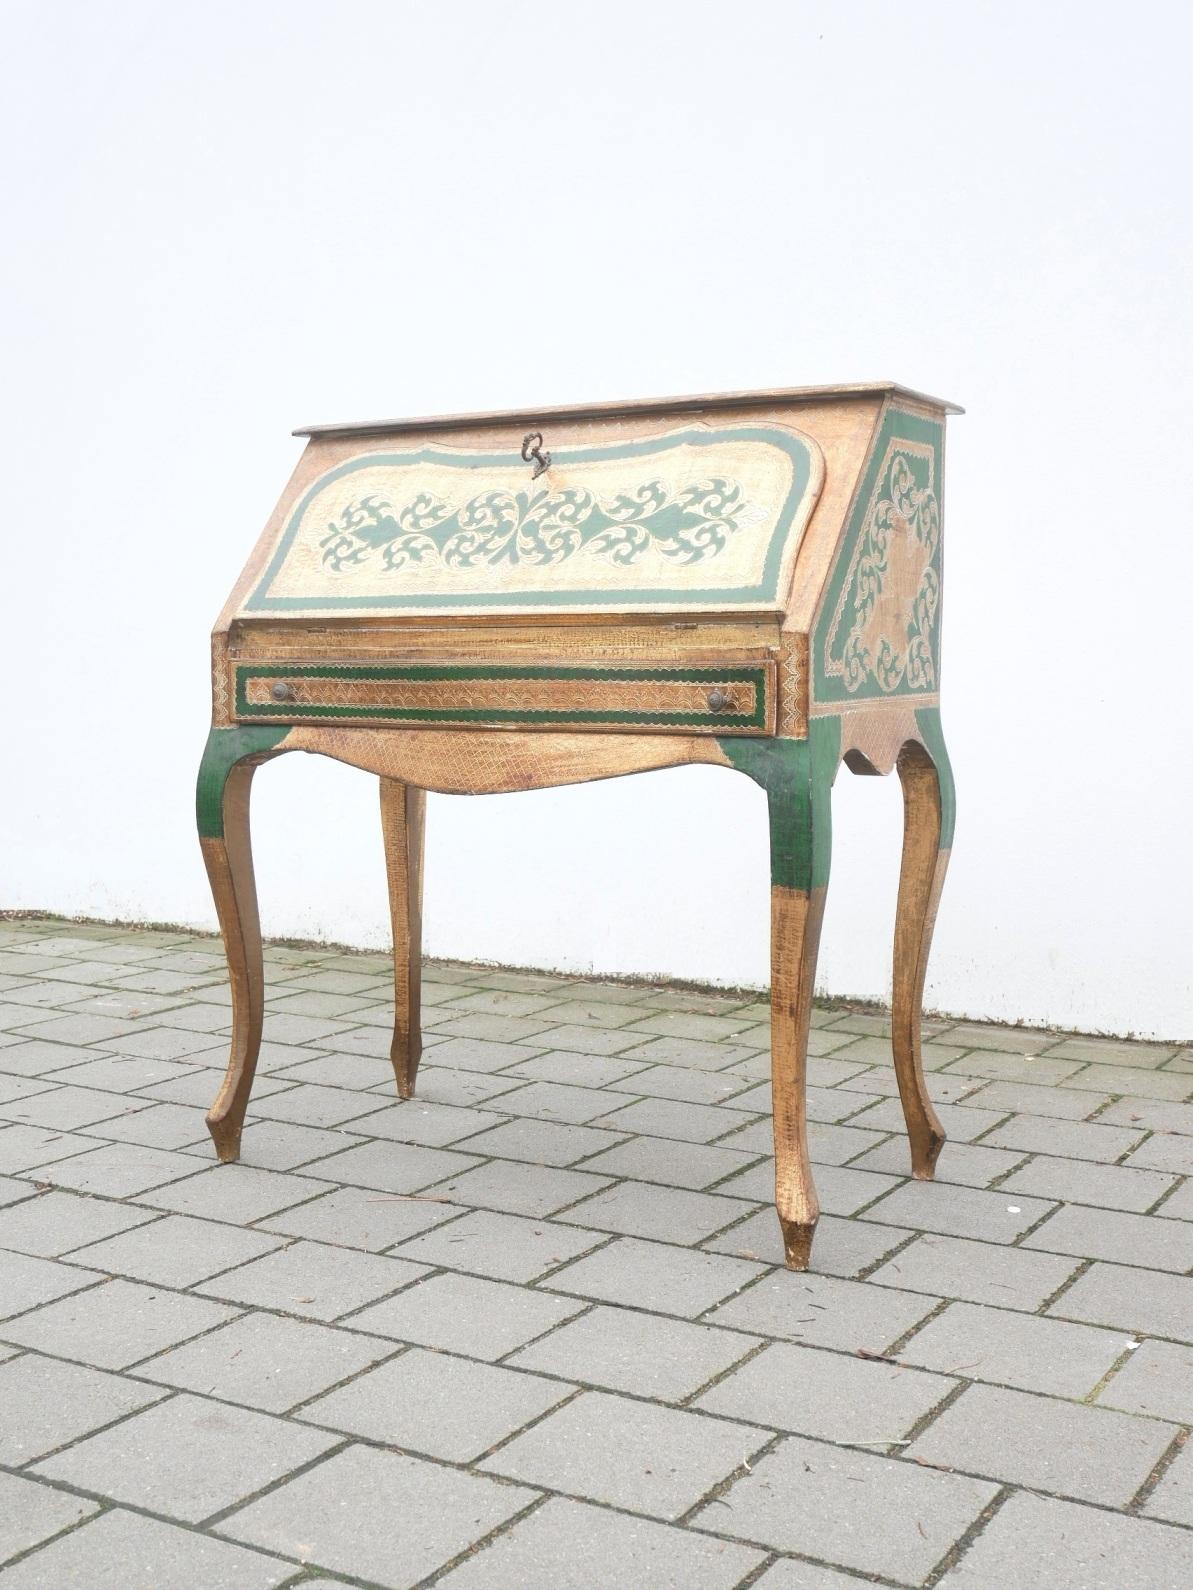 Rare midcentury Italian secretary set : hand decorated foldable writing desk with green lacquering and gold leaf covered wooden corpus. Matching a period full brass chair.